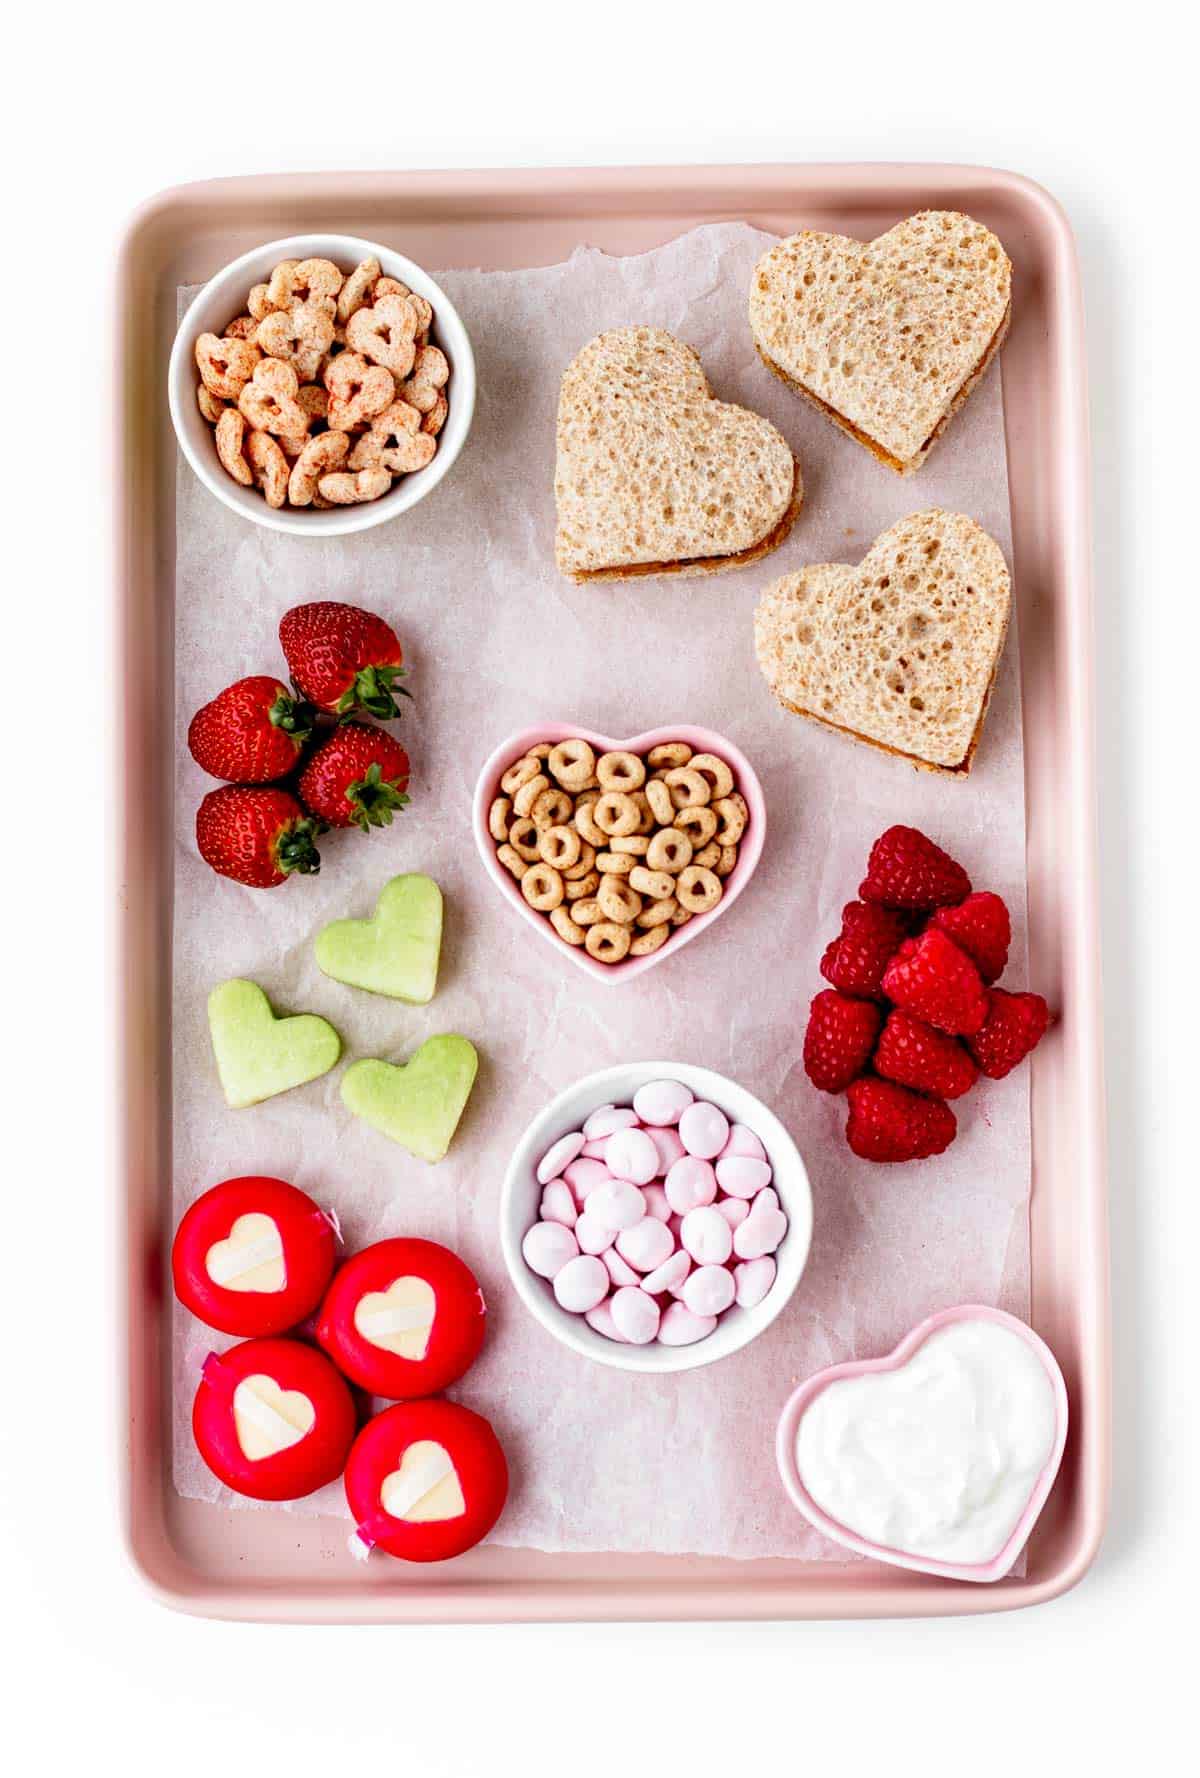 A birds-eye view of the ingredients for the charcuterie board with heart-shaped snacks.